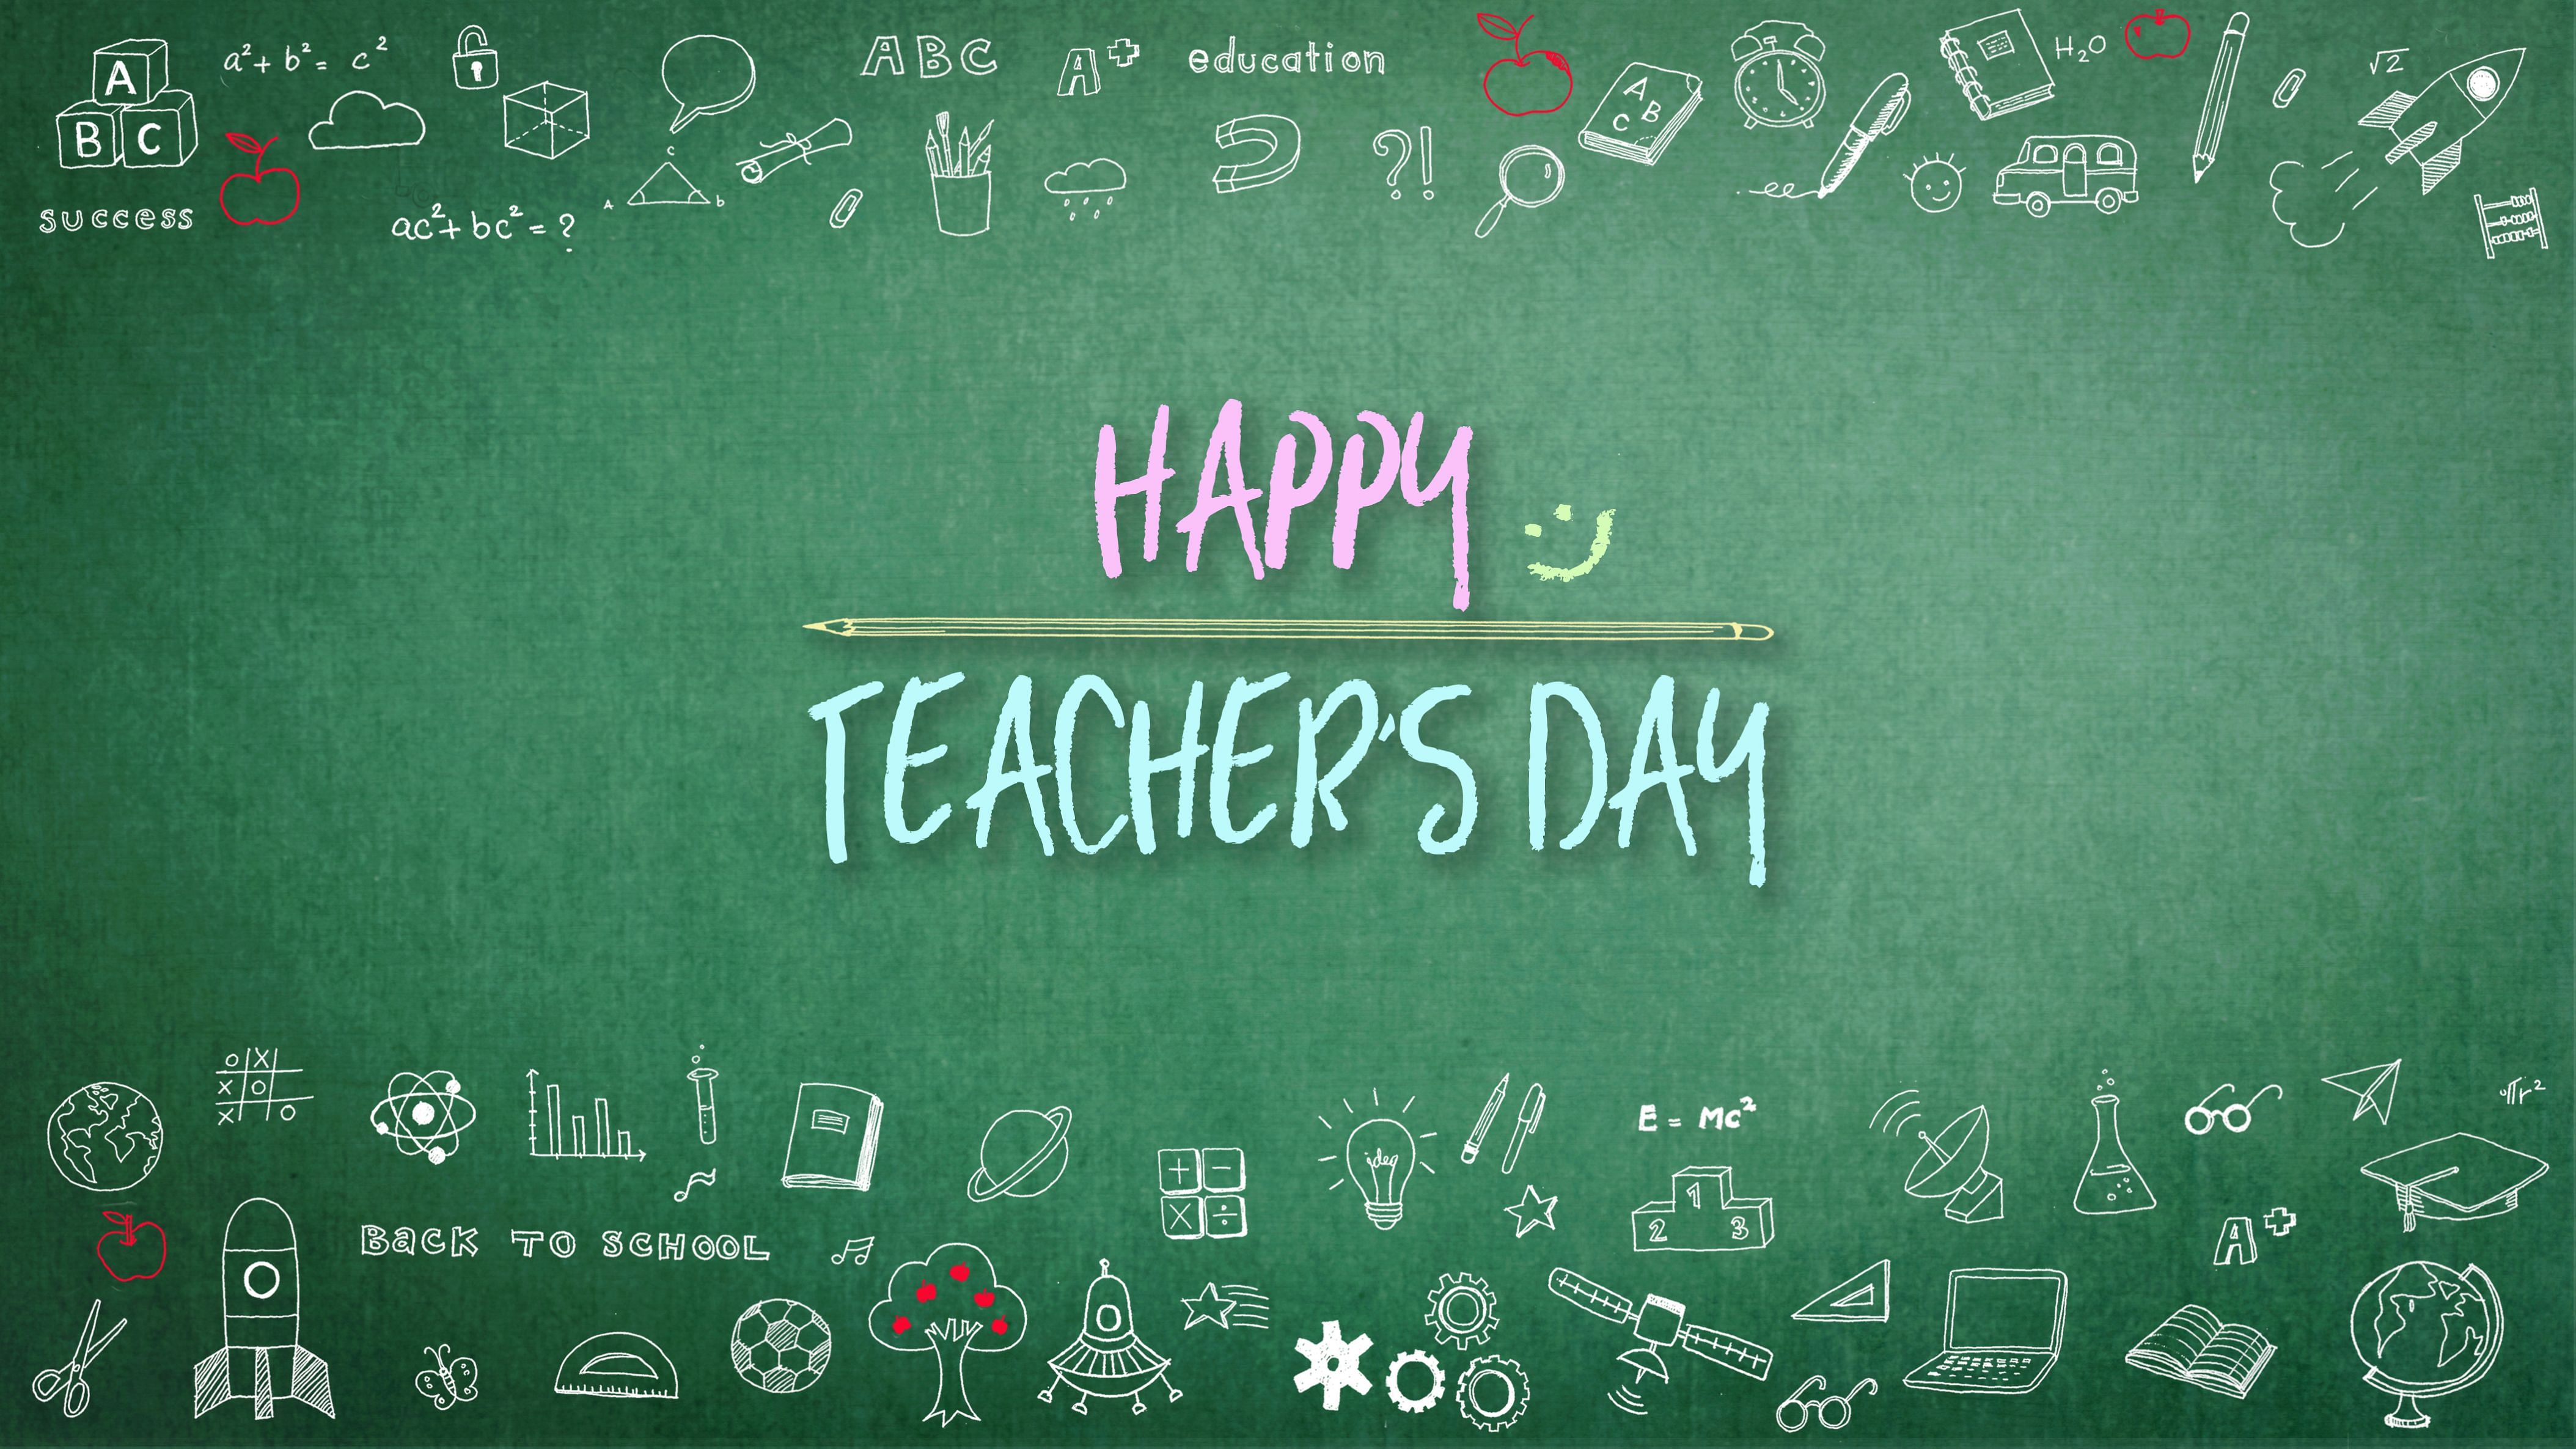 Teacher's Day 2021 Wishes in English, Hindi, Tamil, Marathi, Gujarati. Happy Teacher's Day Image, Greeting Cards, Photo, Status for Whatsapp, Insta and Facbook